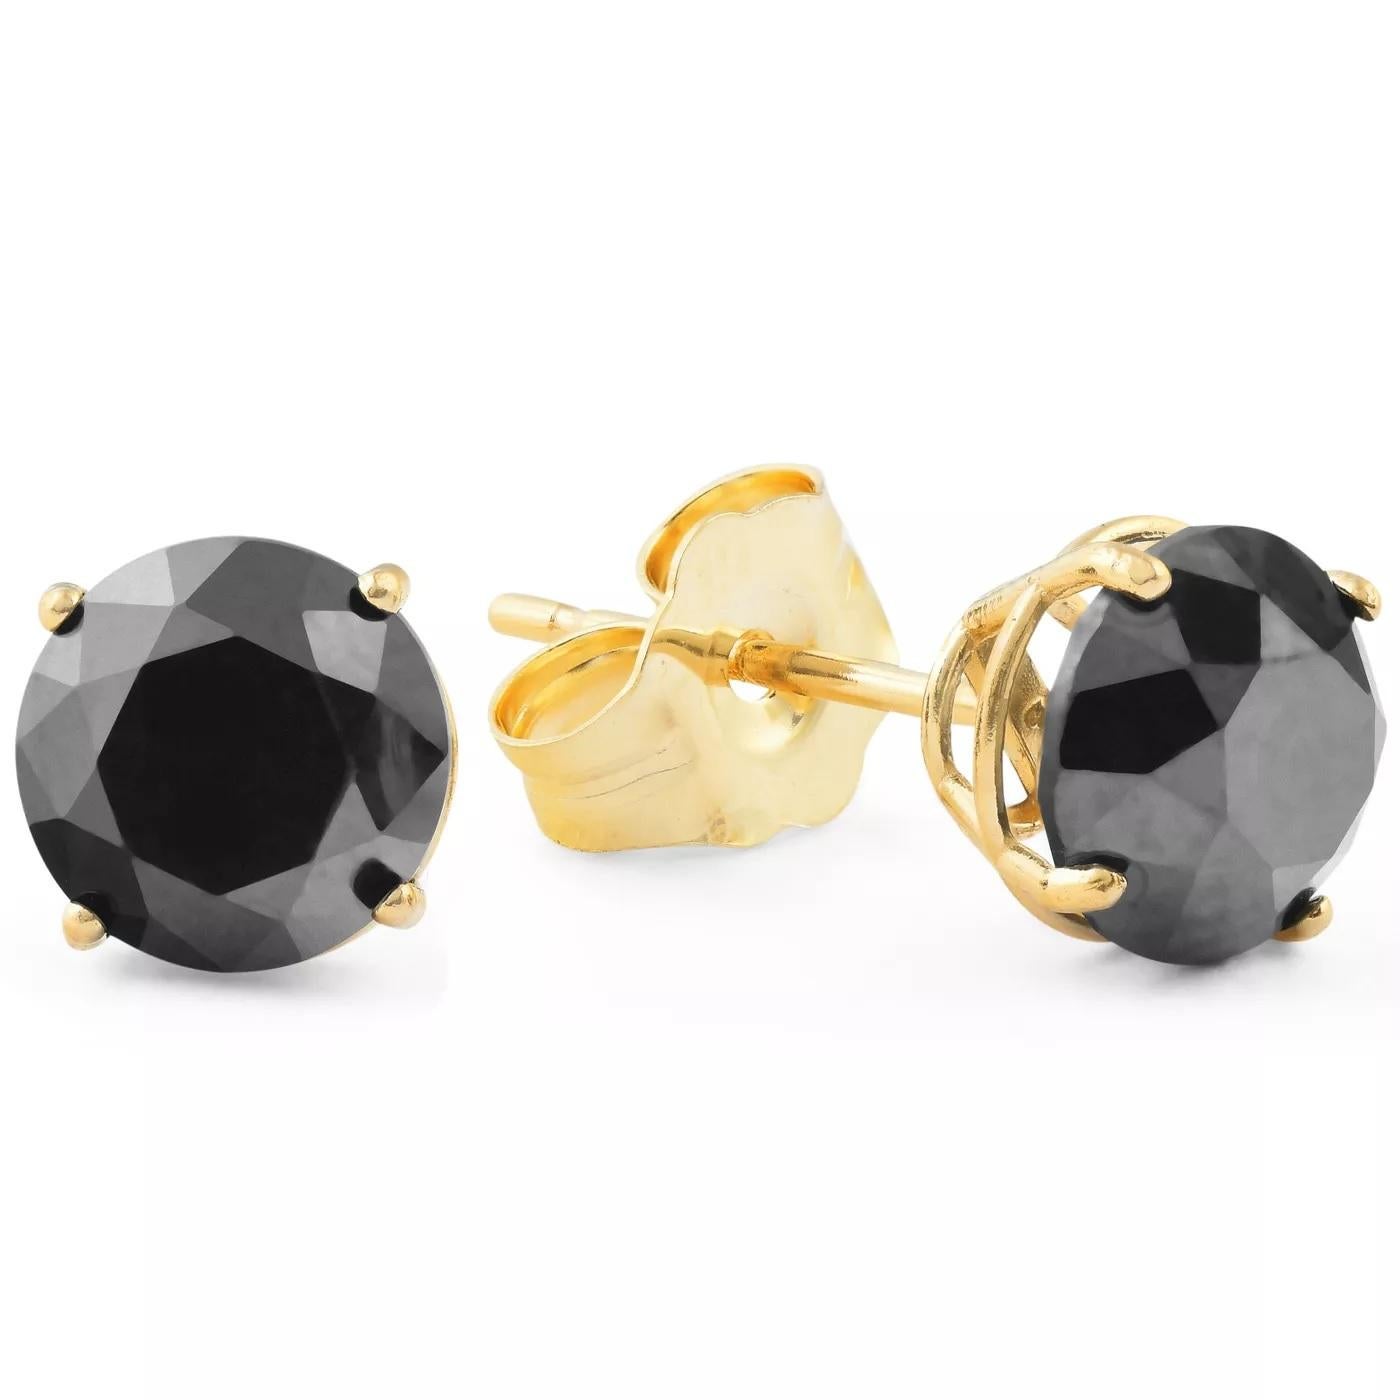 Alluring and refined, these diamond stud earrings are sure to be noticed. Created in 14 K yellow gold, the earring showcases a beguiling 1.33 carat natural black diamond solitaire measuring 6.78 x 6.79 x 4.35mm. Exquisitely made and Captivating with